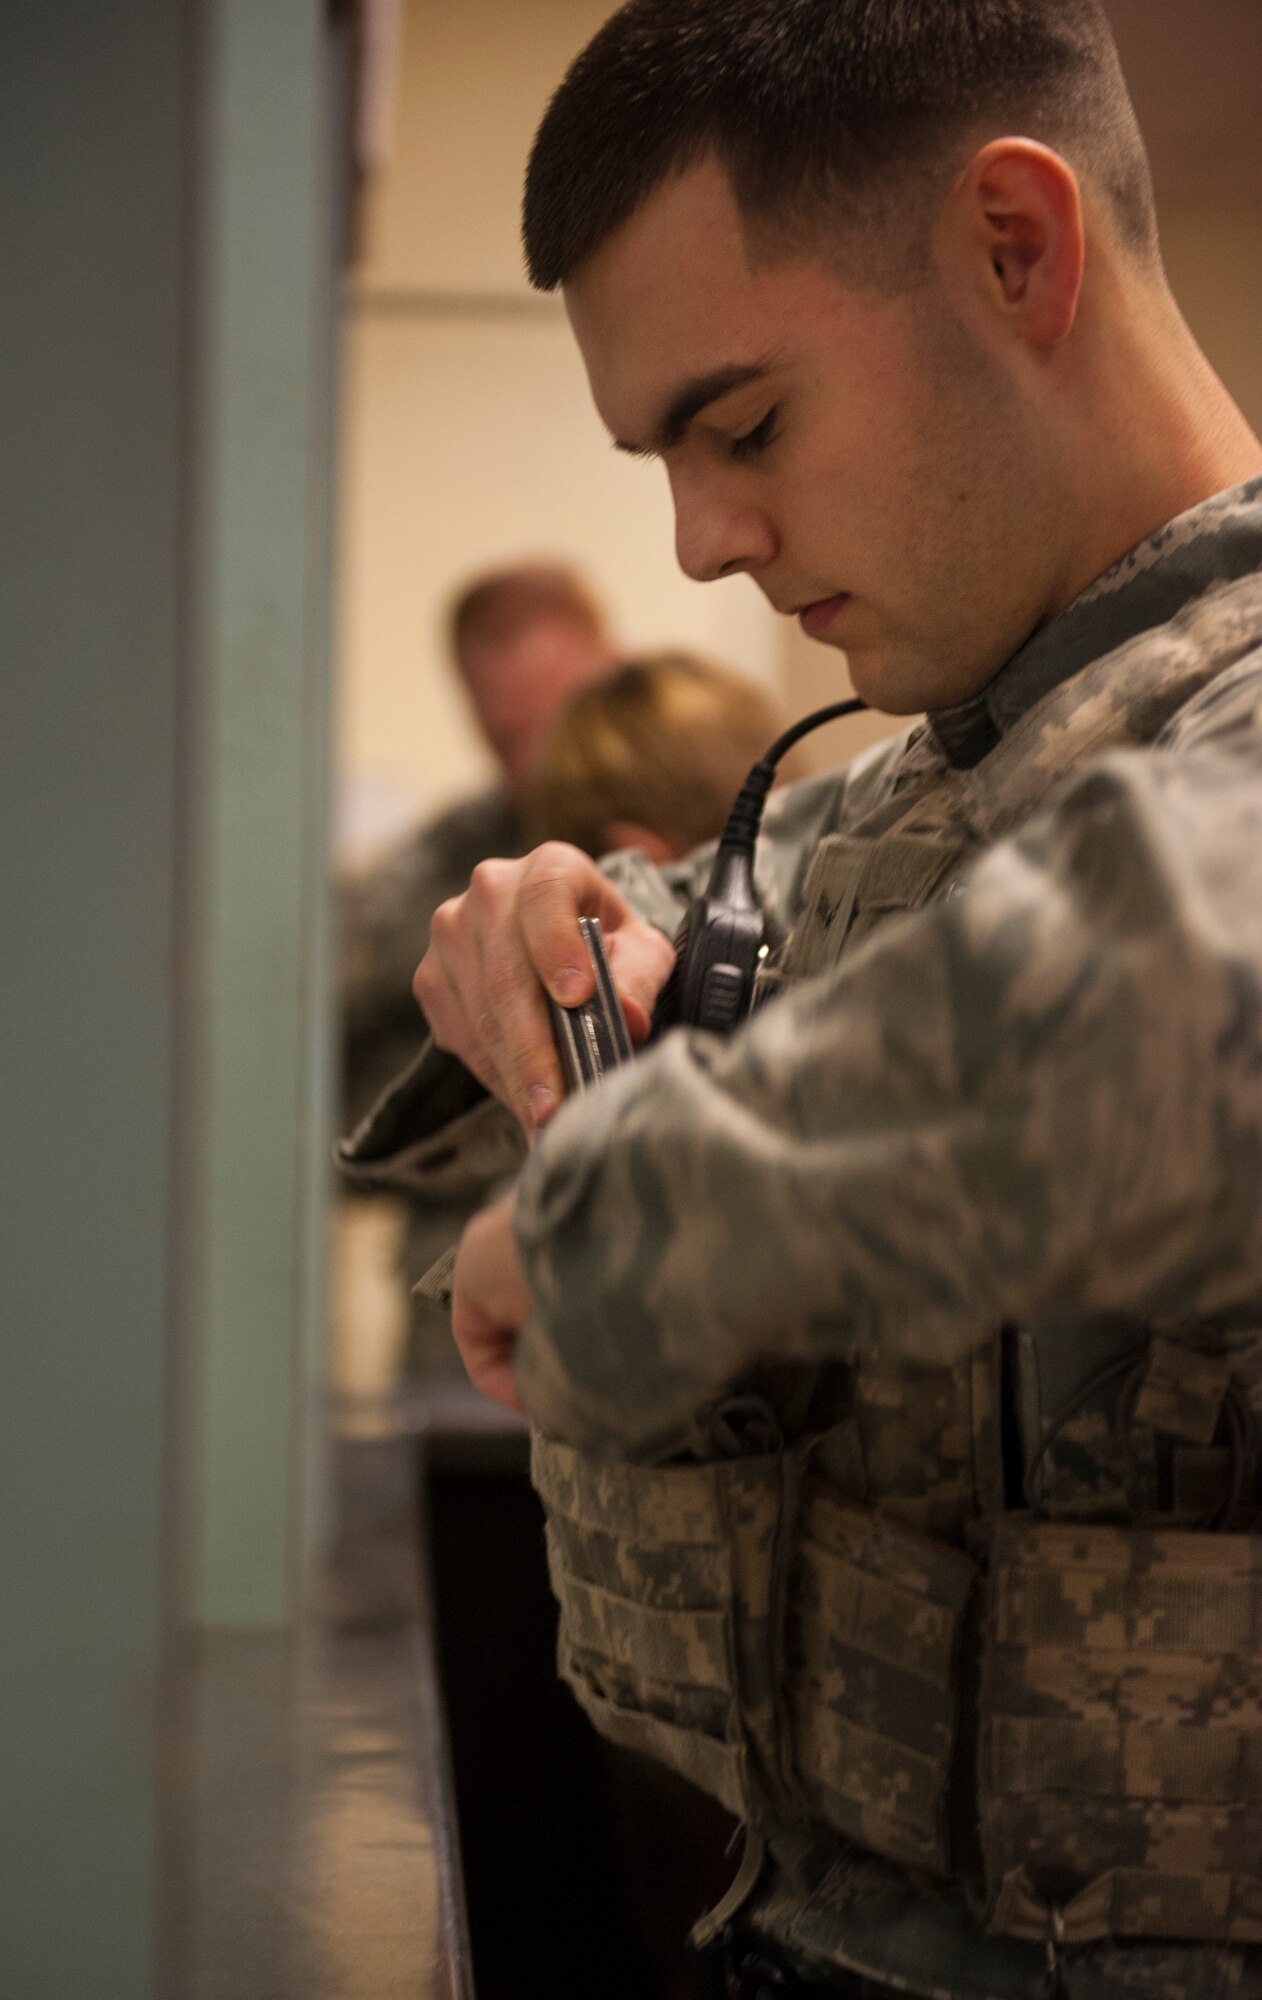 Airman 1st Class Joseph Morrissette, 5th Security Forces Squadron defender, gears up at the Minot Air Force Base armory, Jan. 13, 2014. Security forces members report to the armory before each shift to acquire the proper equipment and weapons. (U.S. Air Force photo/Airman 1st Class Apryl Hall)